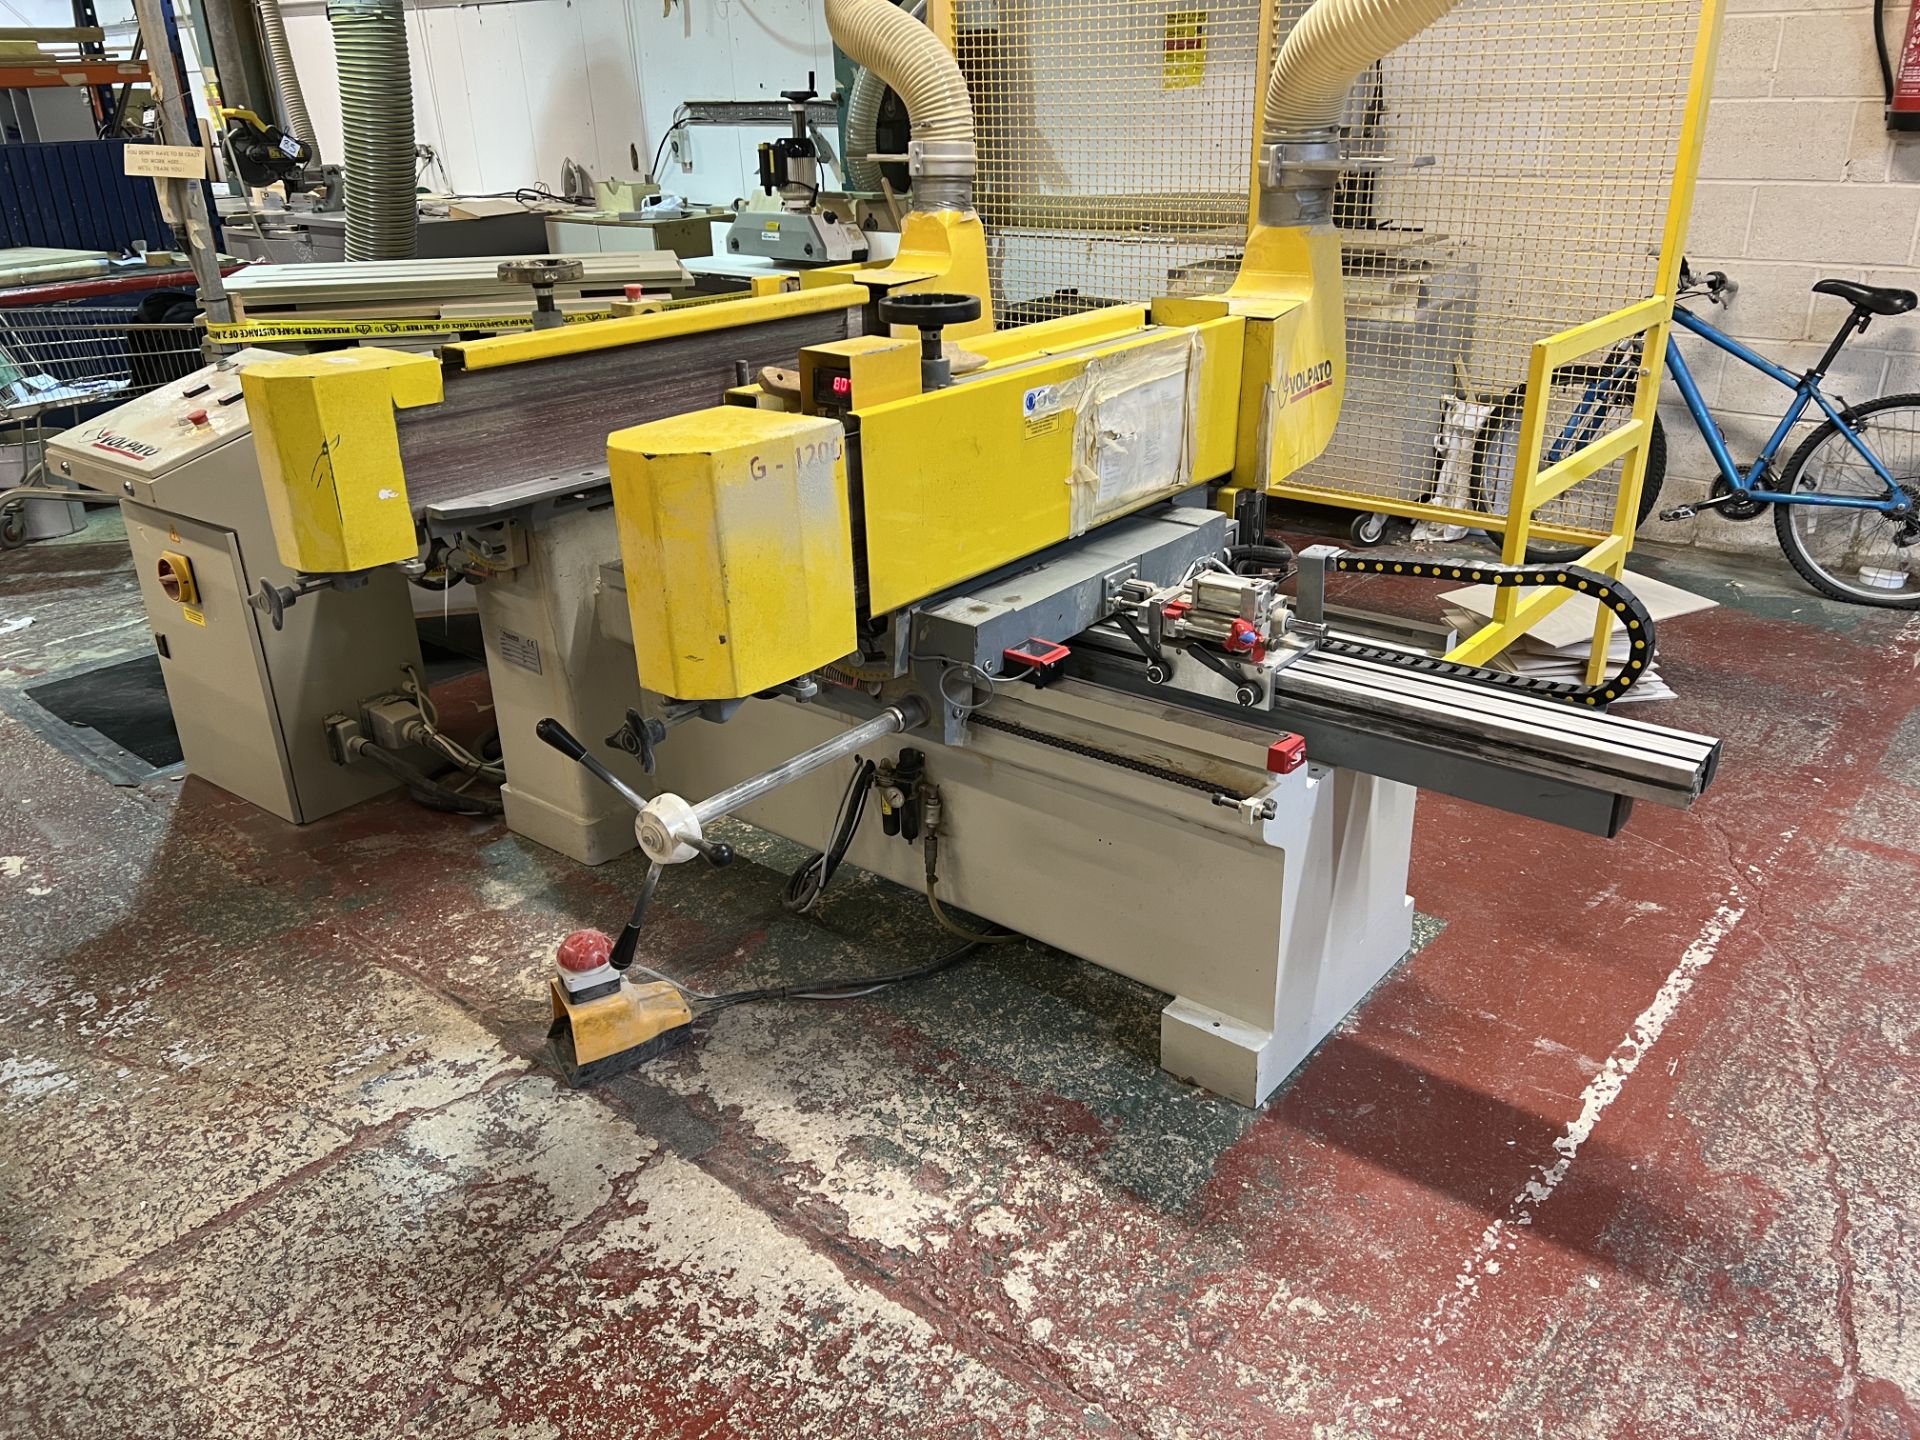 Volpato - Lasm RCG-1200 double sided wide belt box sander, belt speed 26 metres second with 920mm - Image 2 of 9